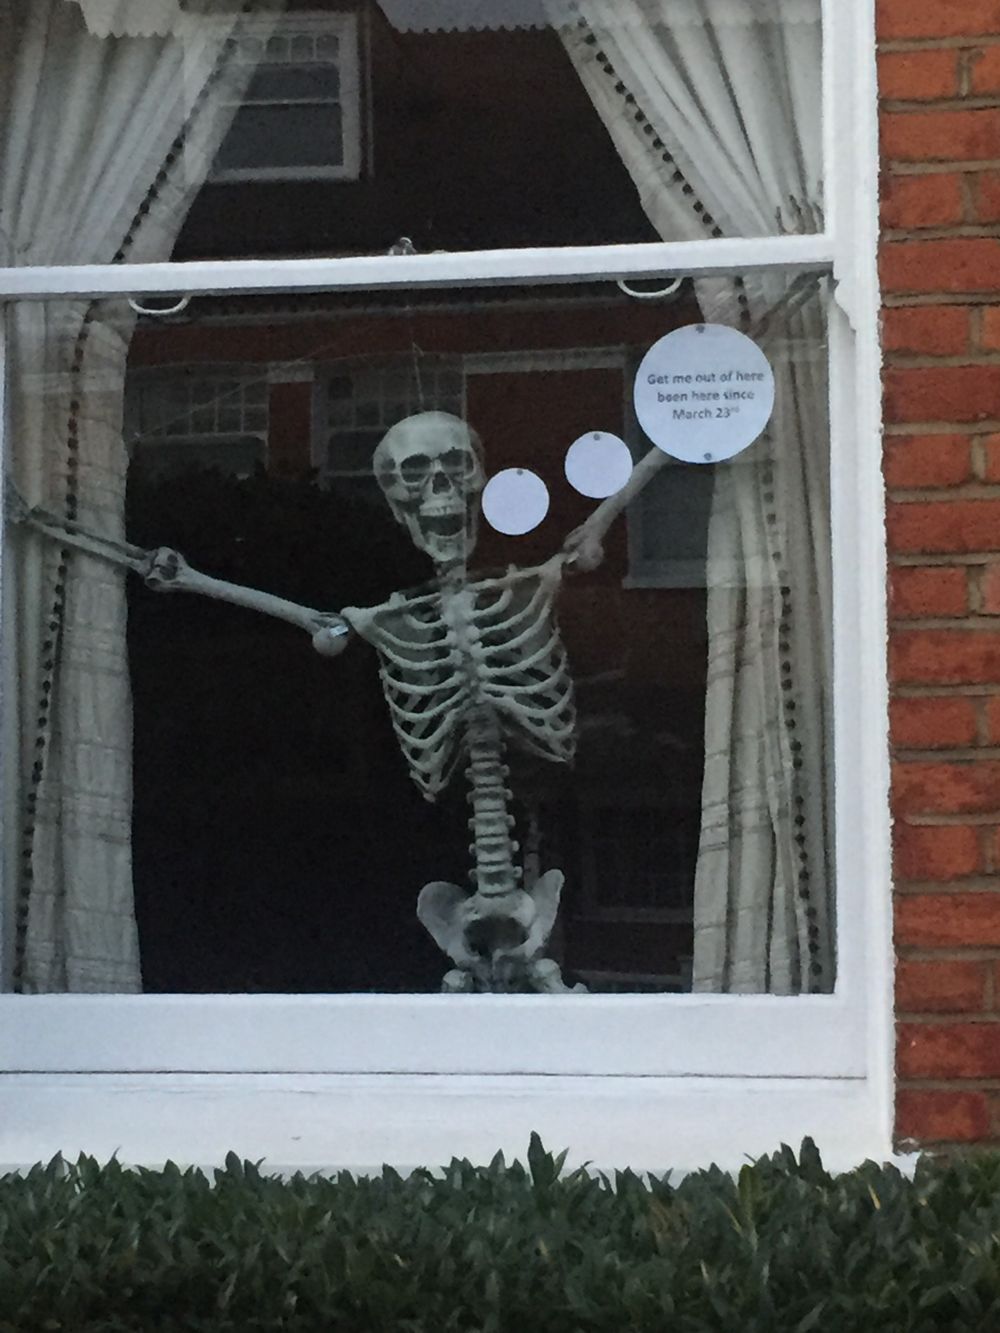 An exterior shot of someone's house. In the front window a life-sized skeleton model, arms spread to the top of the window, mouth open. A paper speech bubble reads: Get me out of here. Been here since March 23rd.